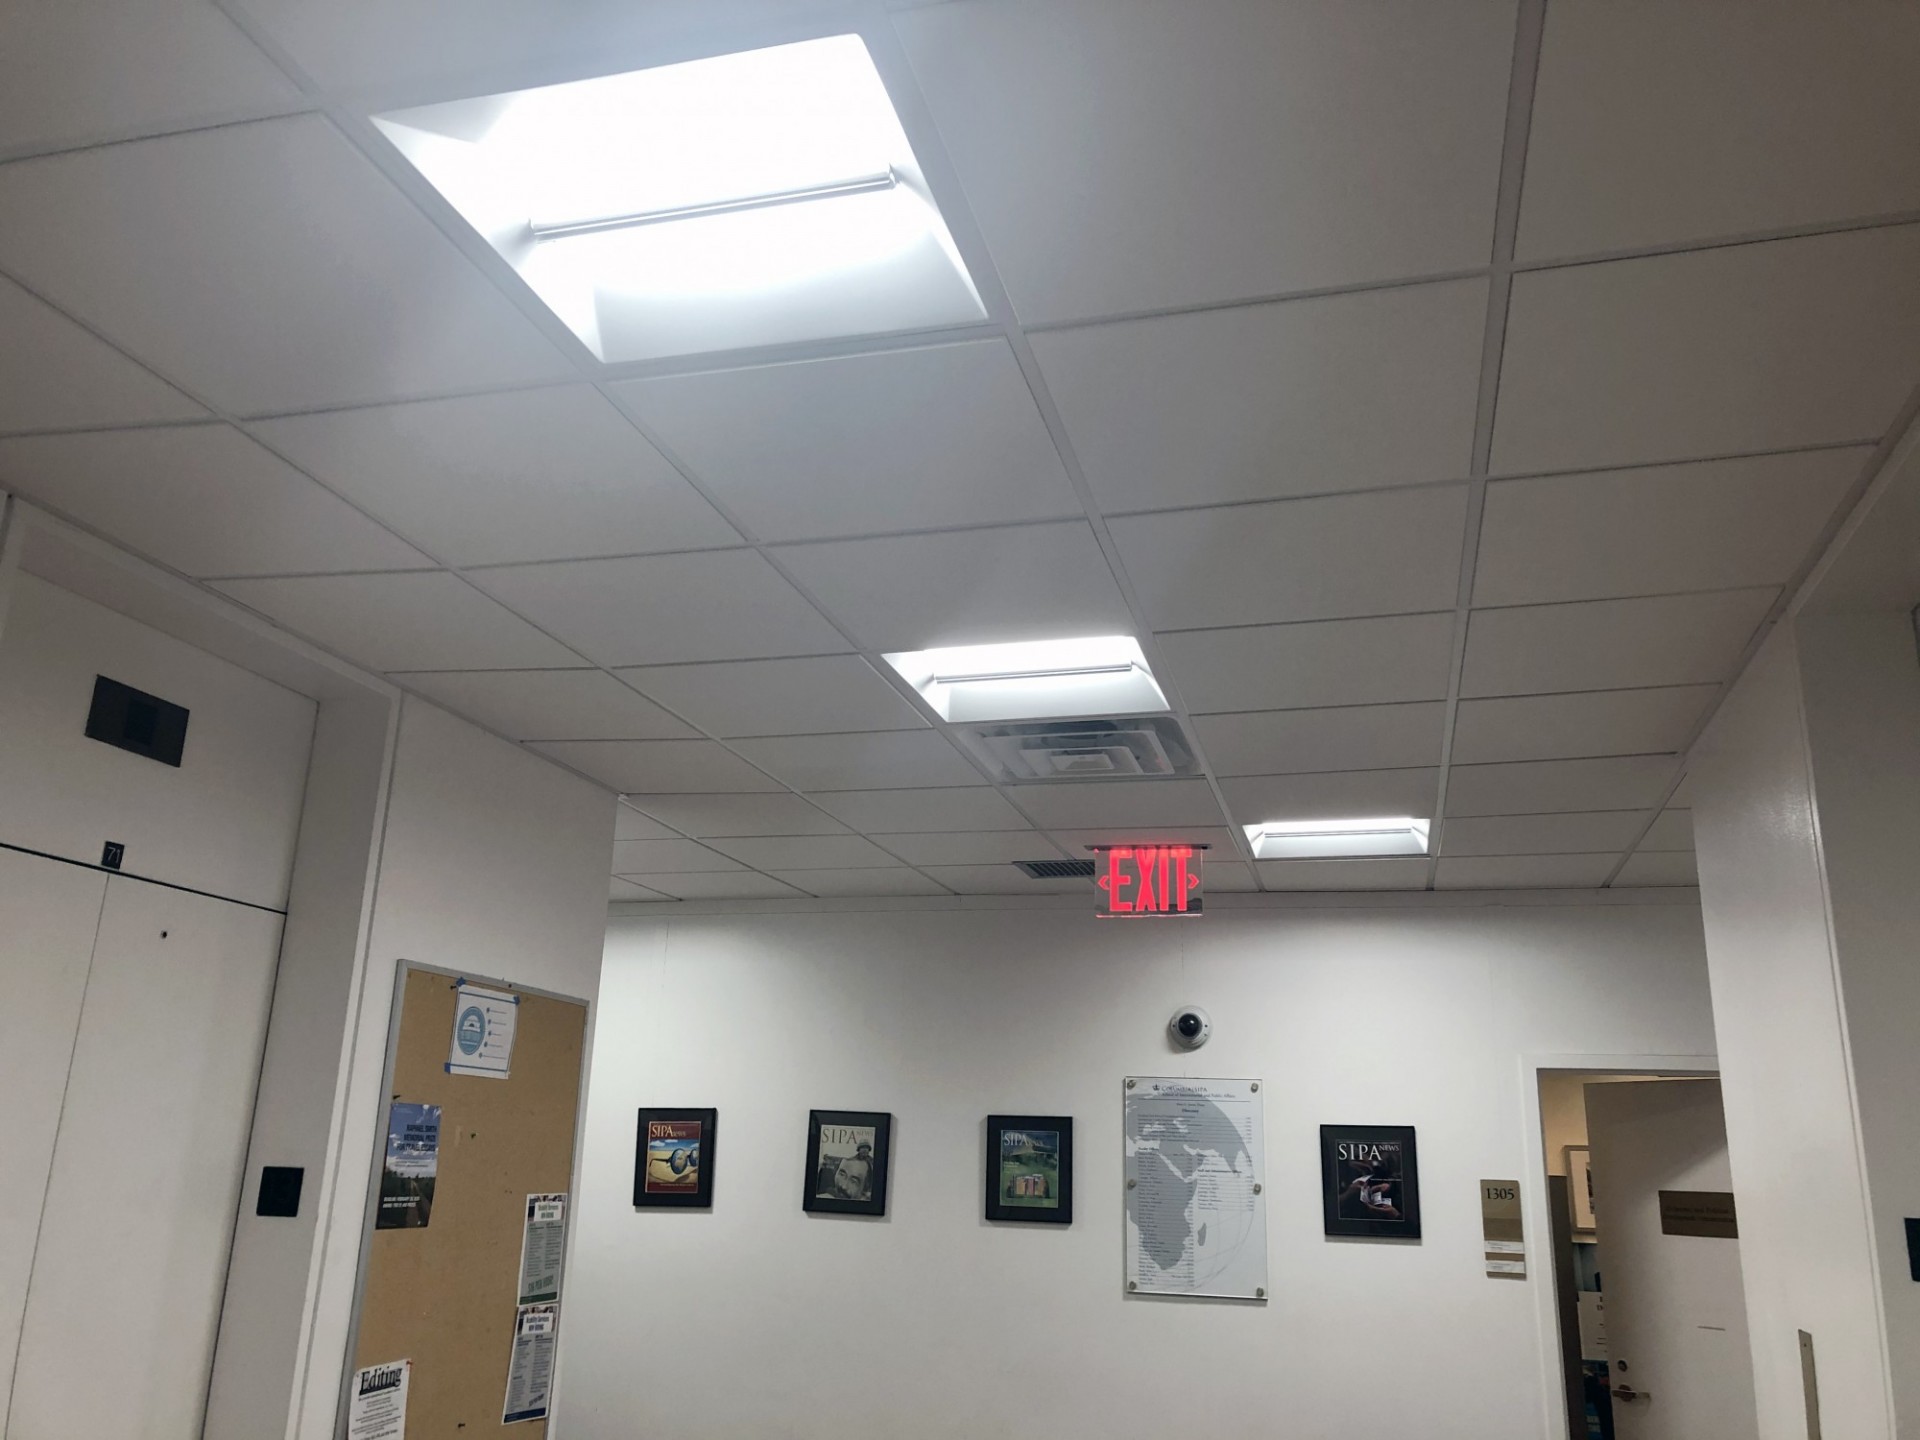 Public space on the twelfth and thirteenth floors of the International Affairs Building was improved with the installation of new ceiling tiles and LED lights.